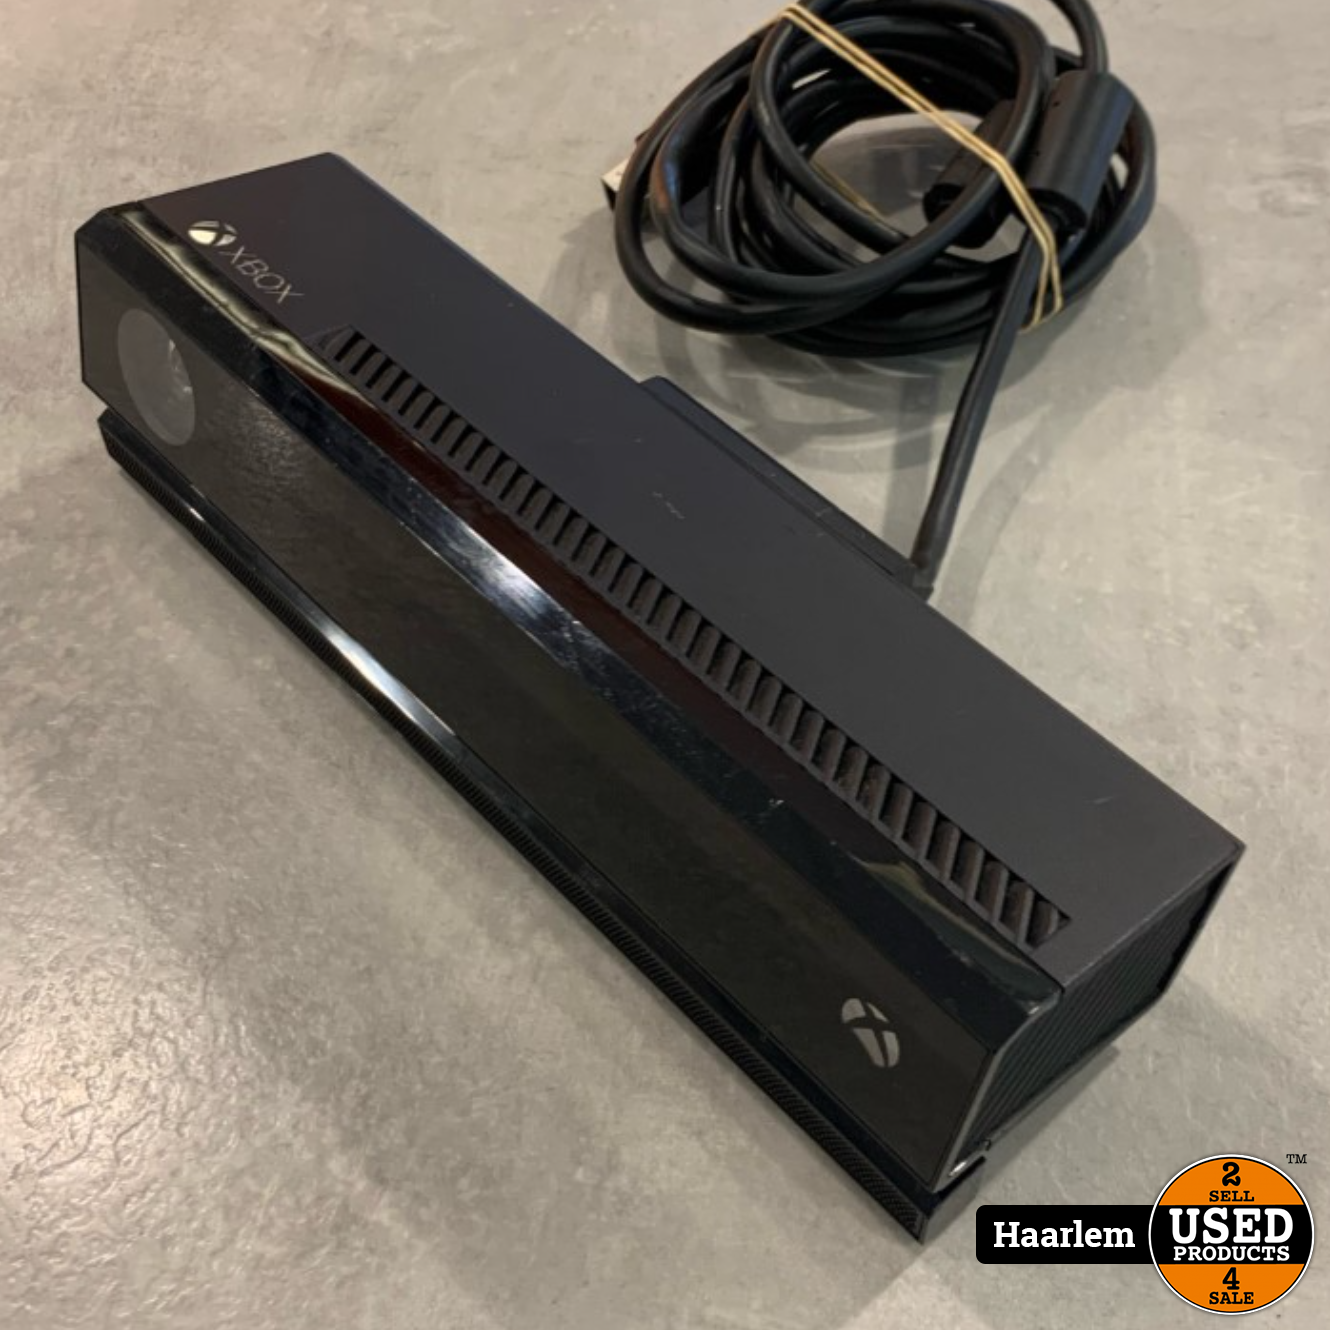 Xbox One sensor model 1520 in nette staat - Used Products Haarlem Cronjéstraat